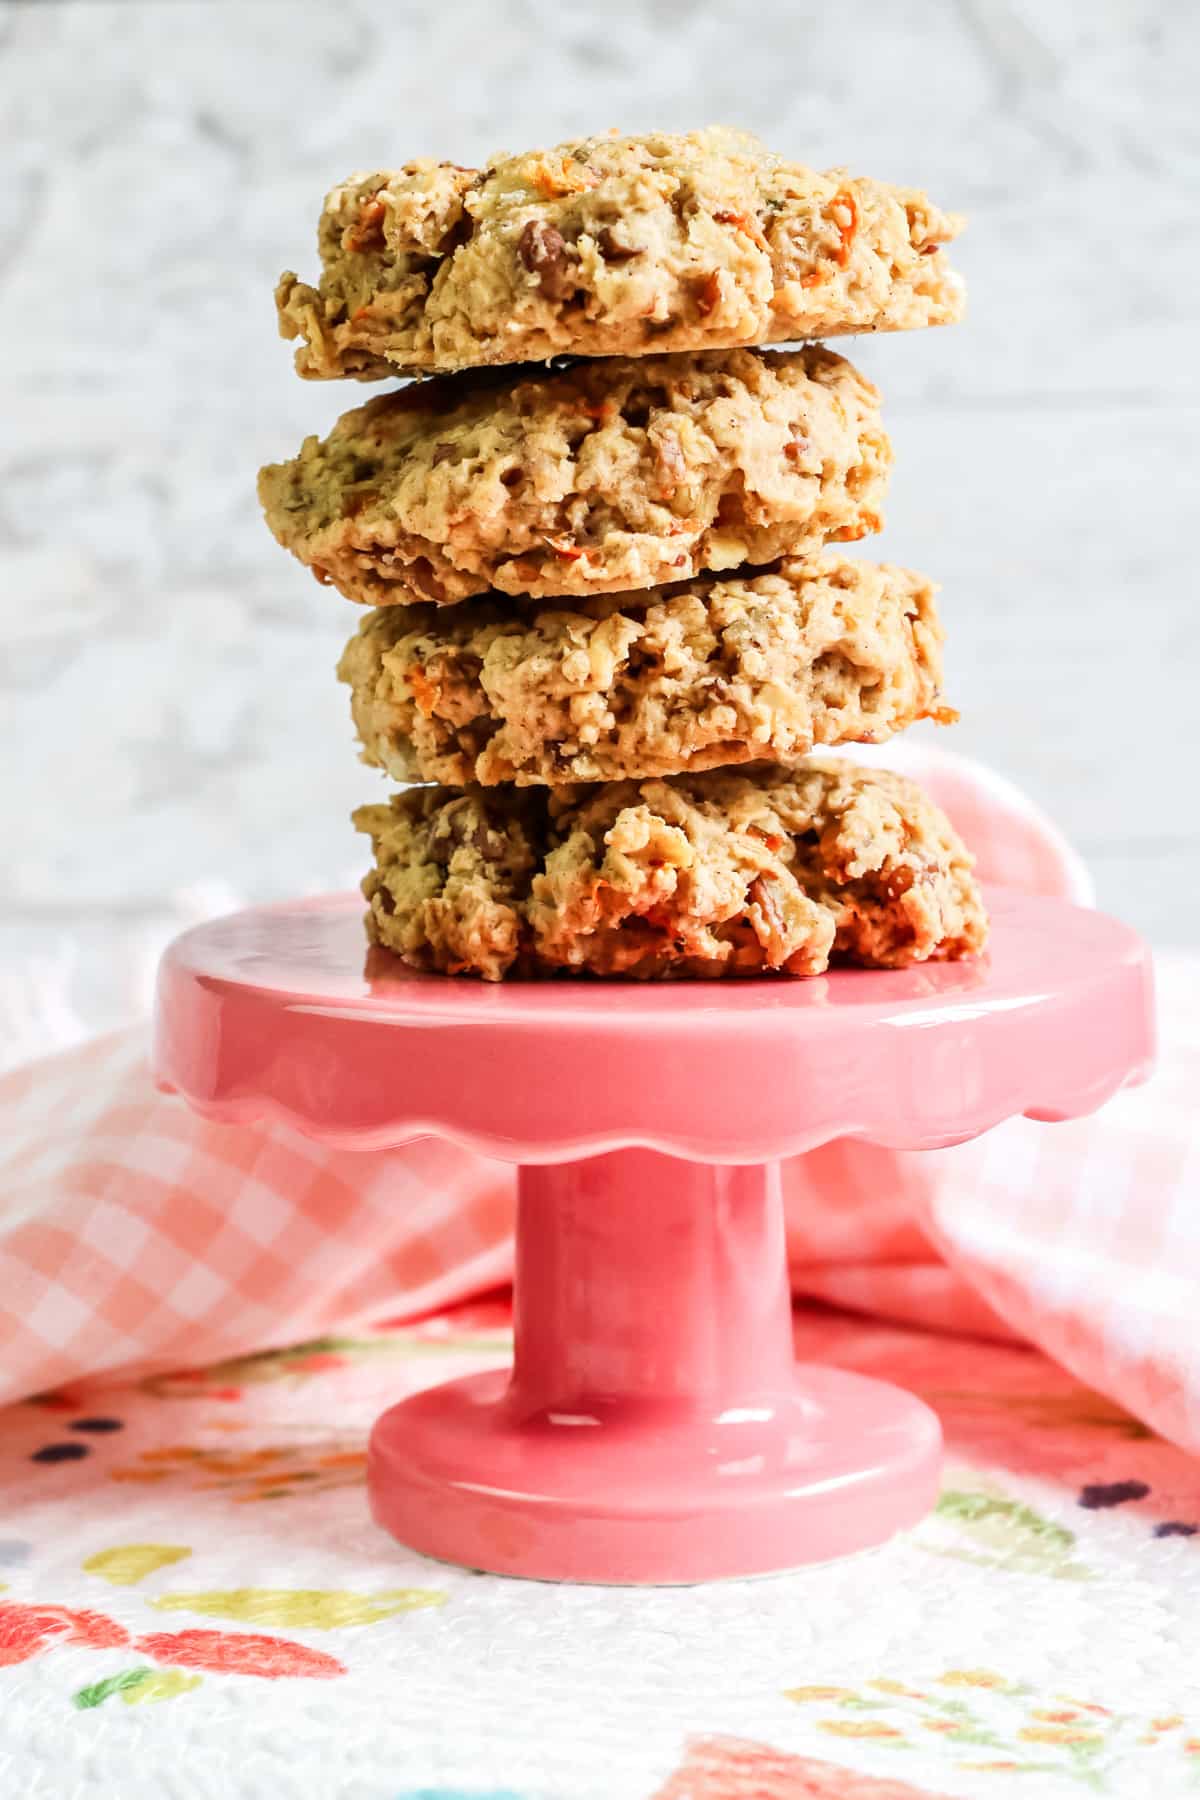 Four carrot oatmeal cookies stacked on a serving platter.